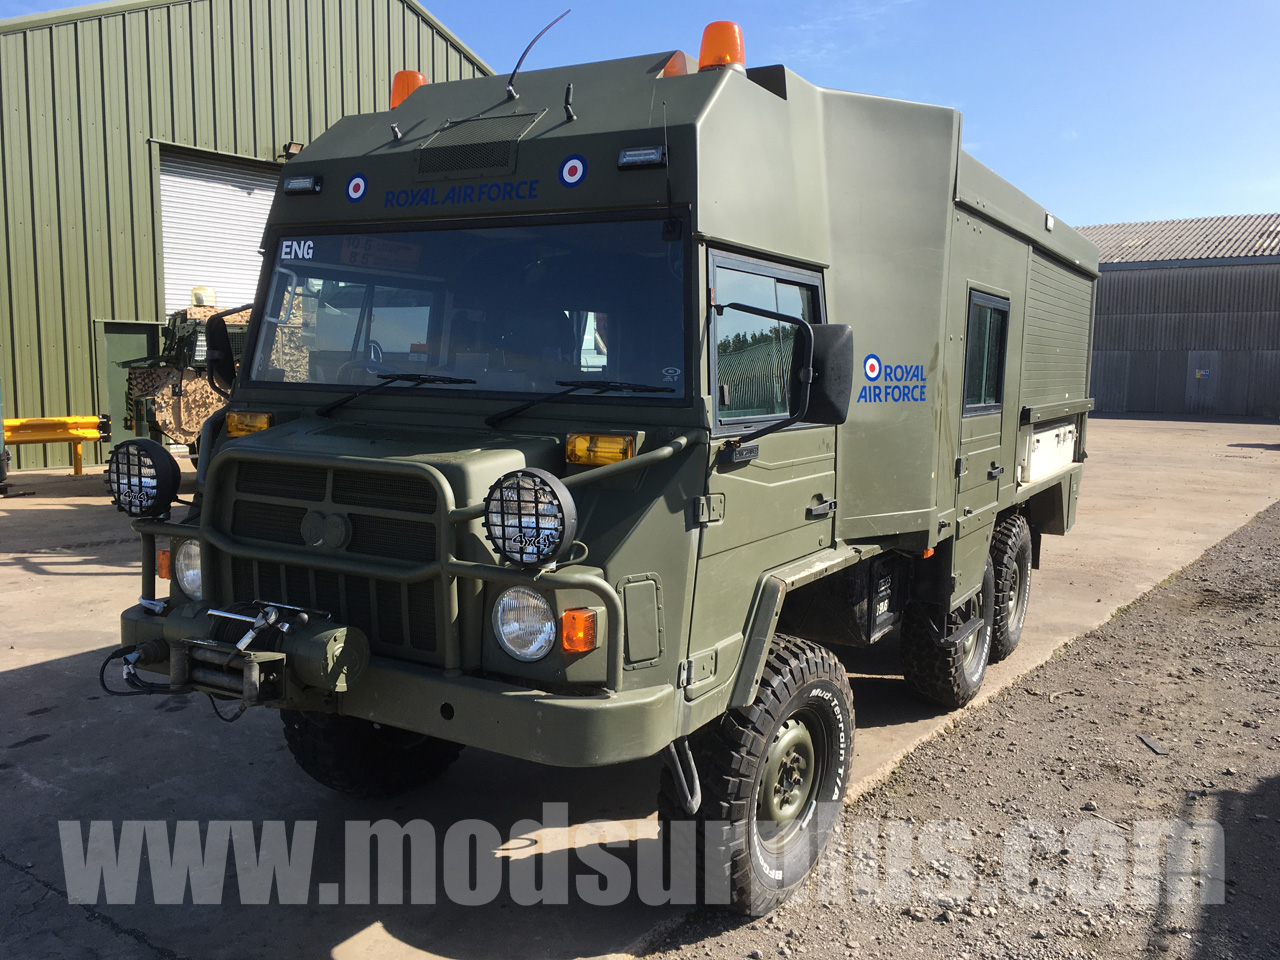 Pinzgauer 718 MK 6x6 RHD Crew Cab Utility - Govsales of mod surplus ex army trucks, ex army land rovers and other military vehicles for sale